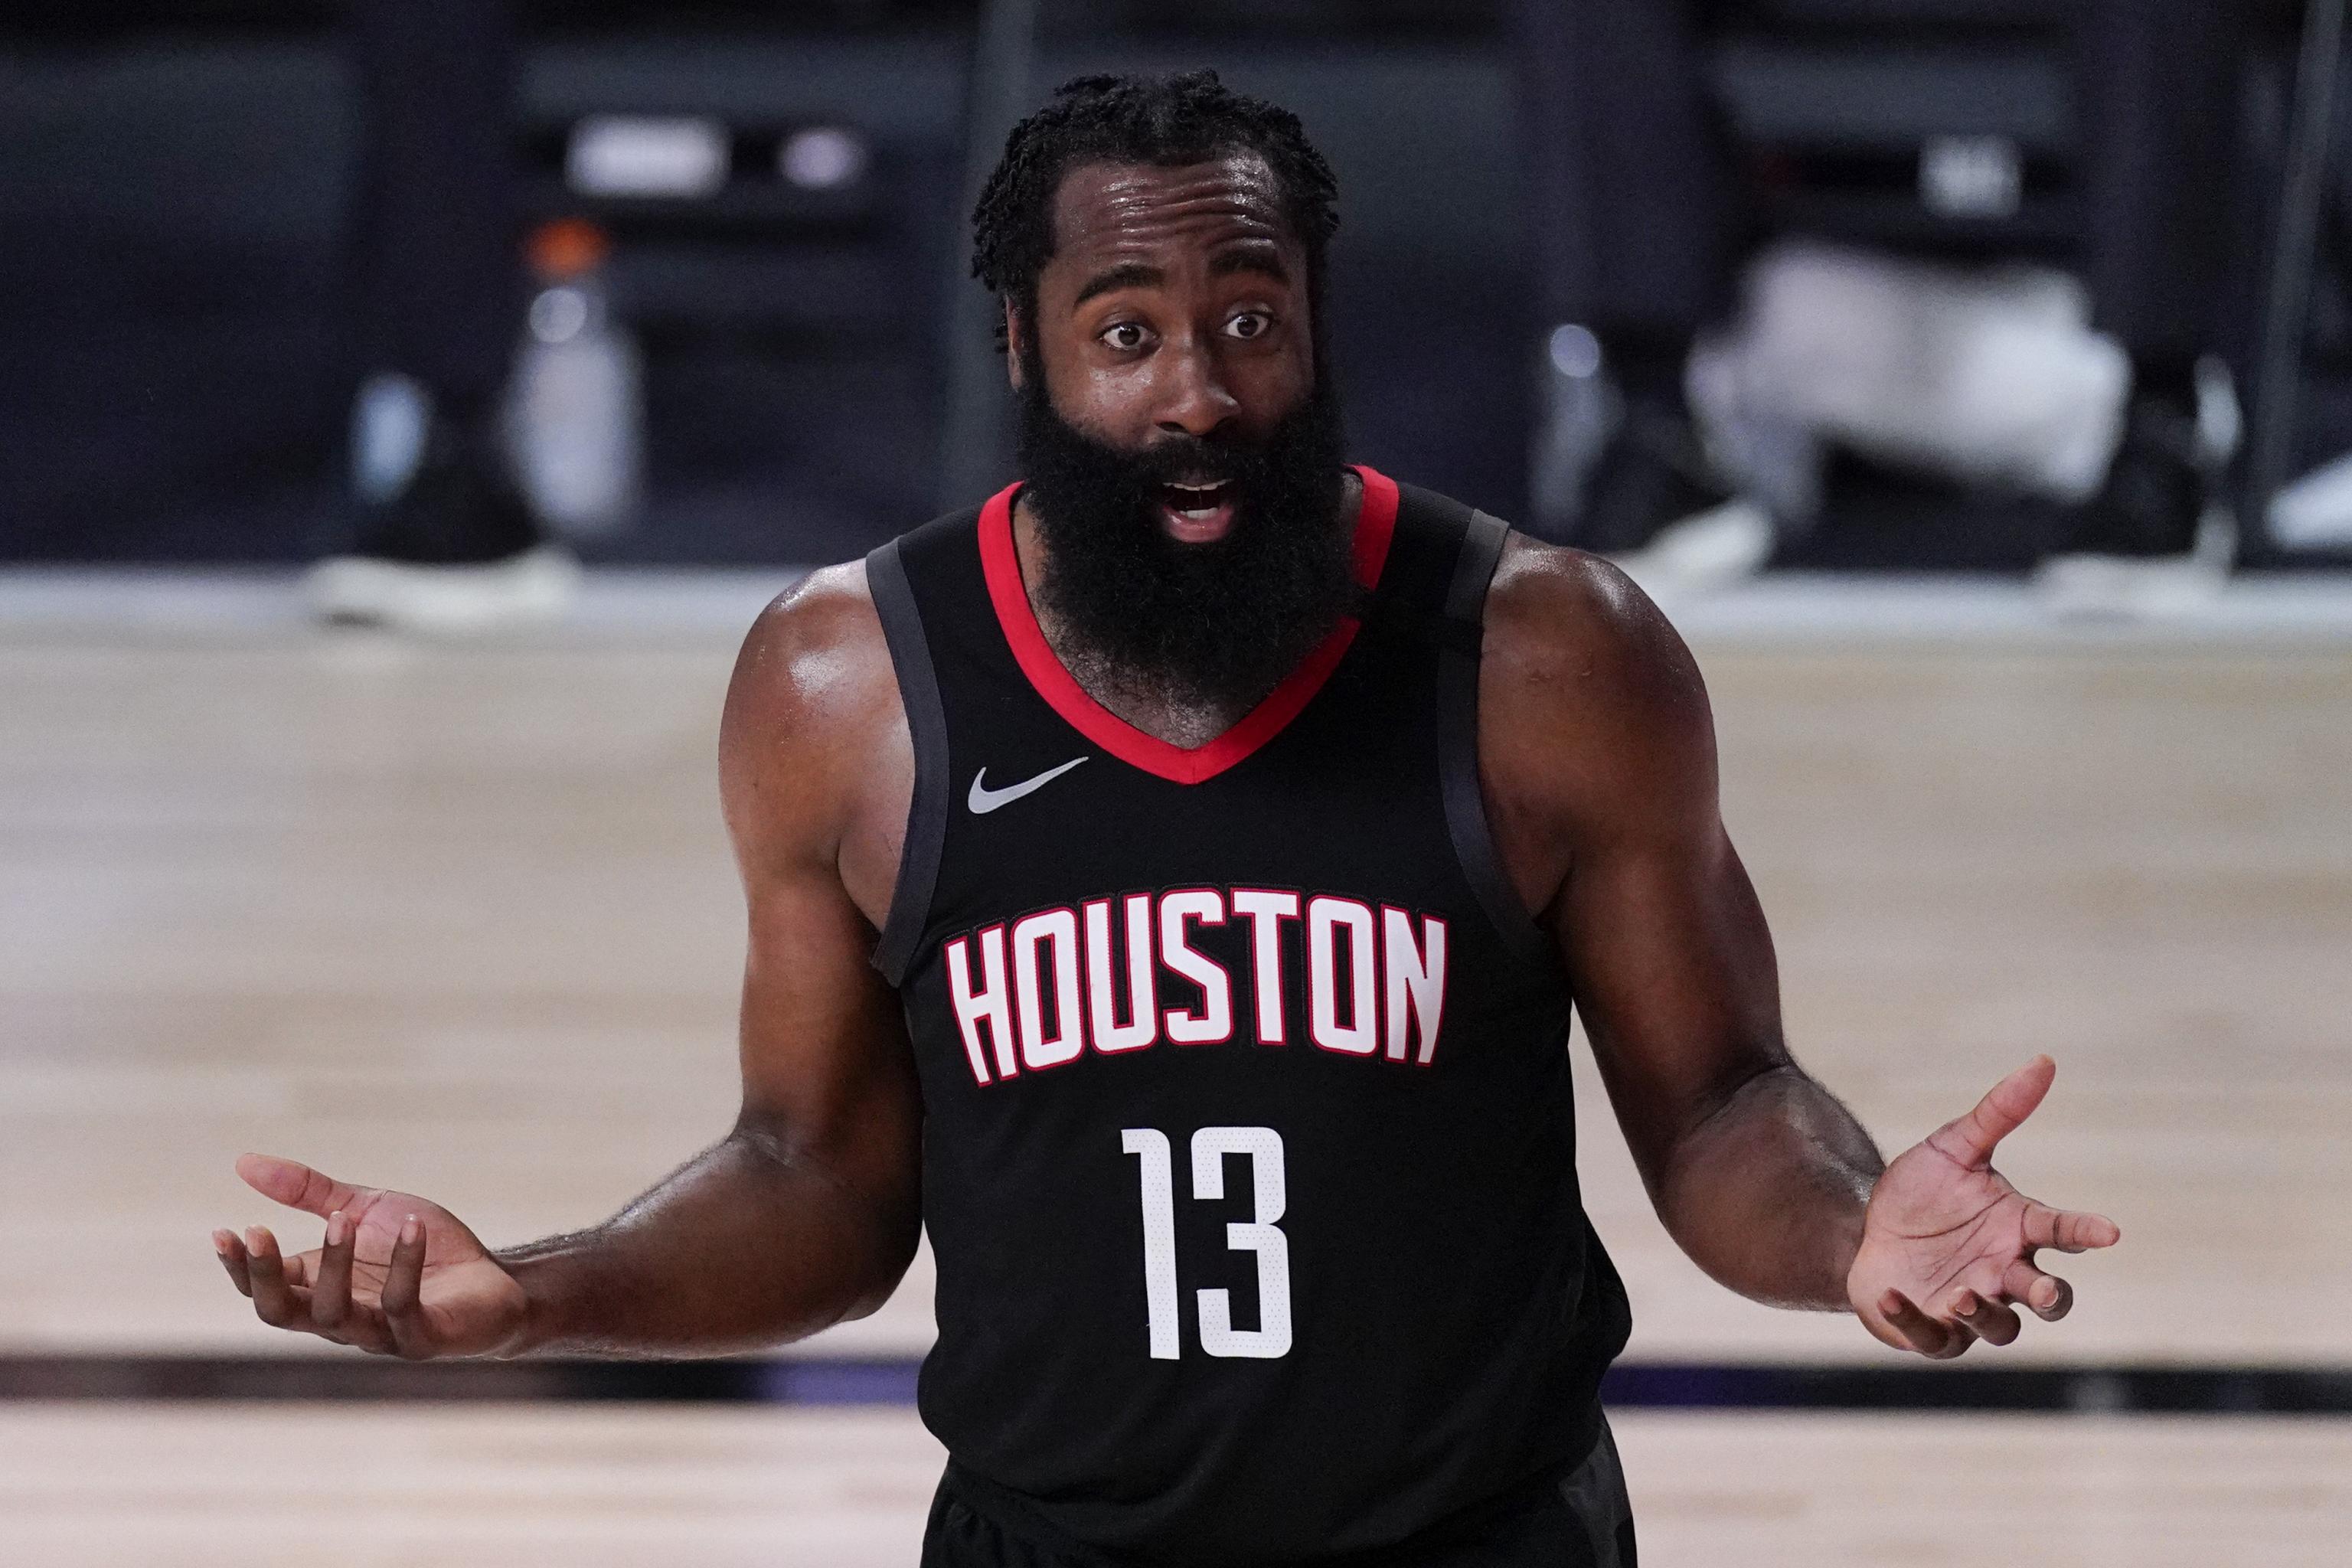 2022-2023 Houston Rockets roster after the trade deadline